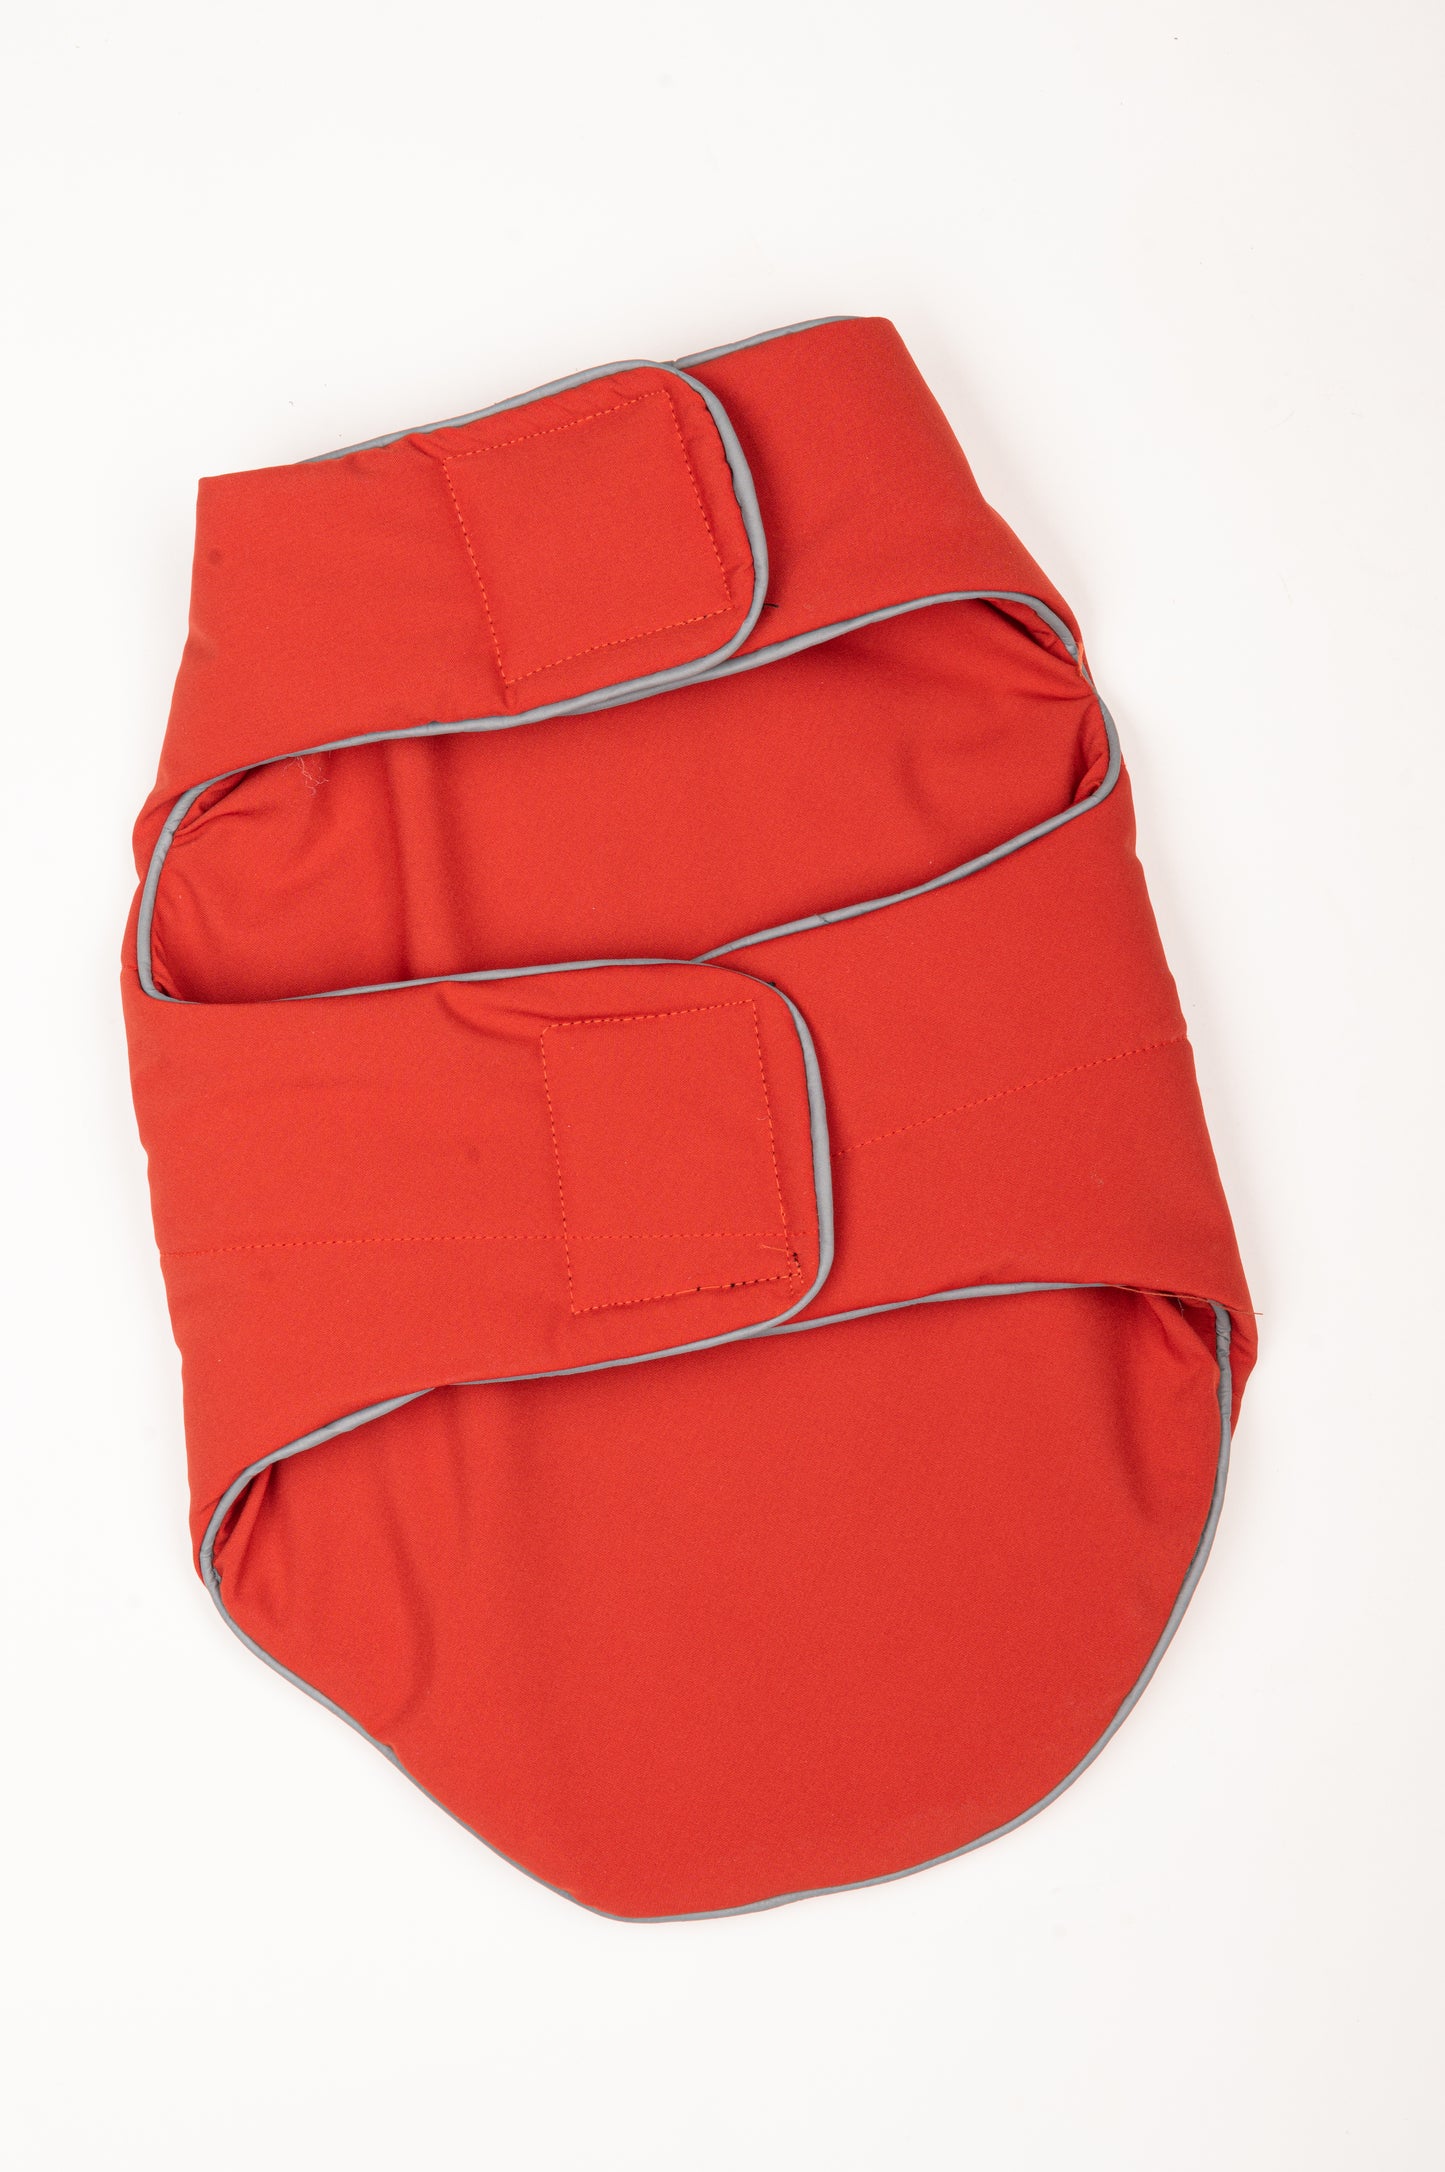 Pet Snugs Water-Resistant Top & Soft Cotton Lining Jacket For Your Furry Friend Rust Red